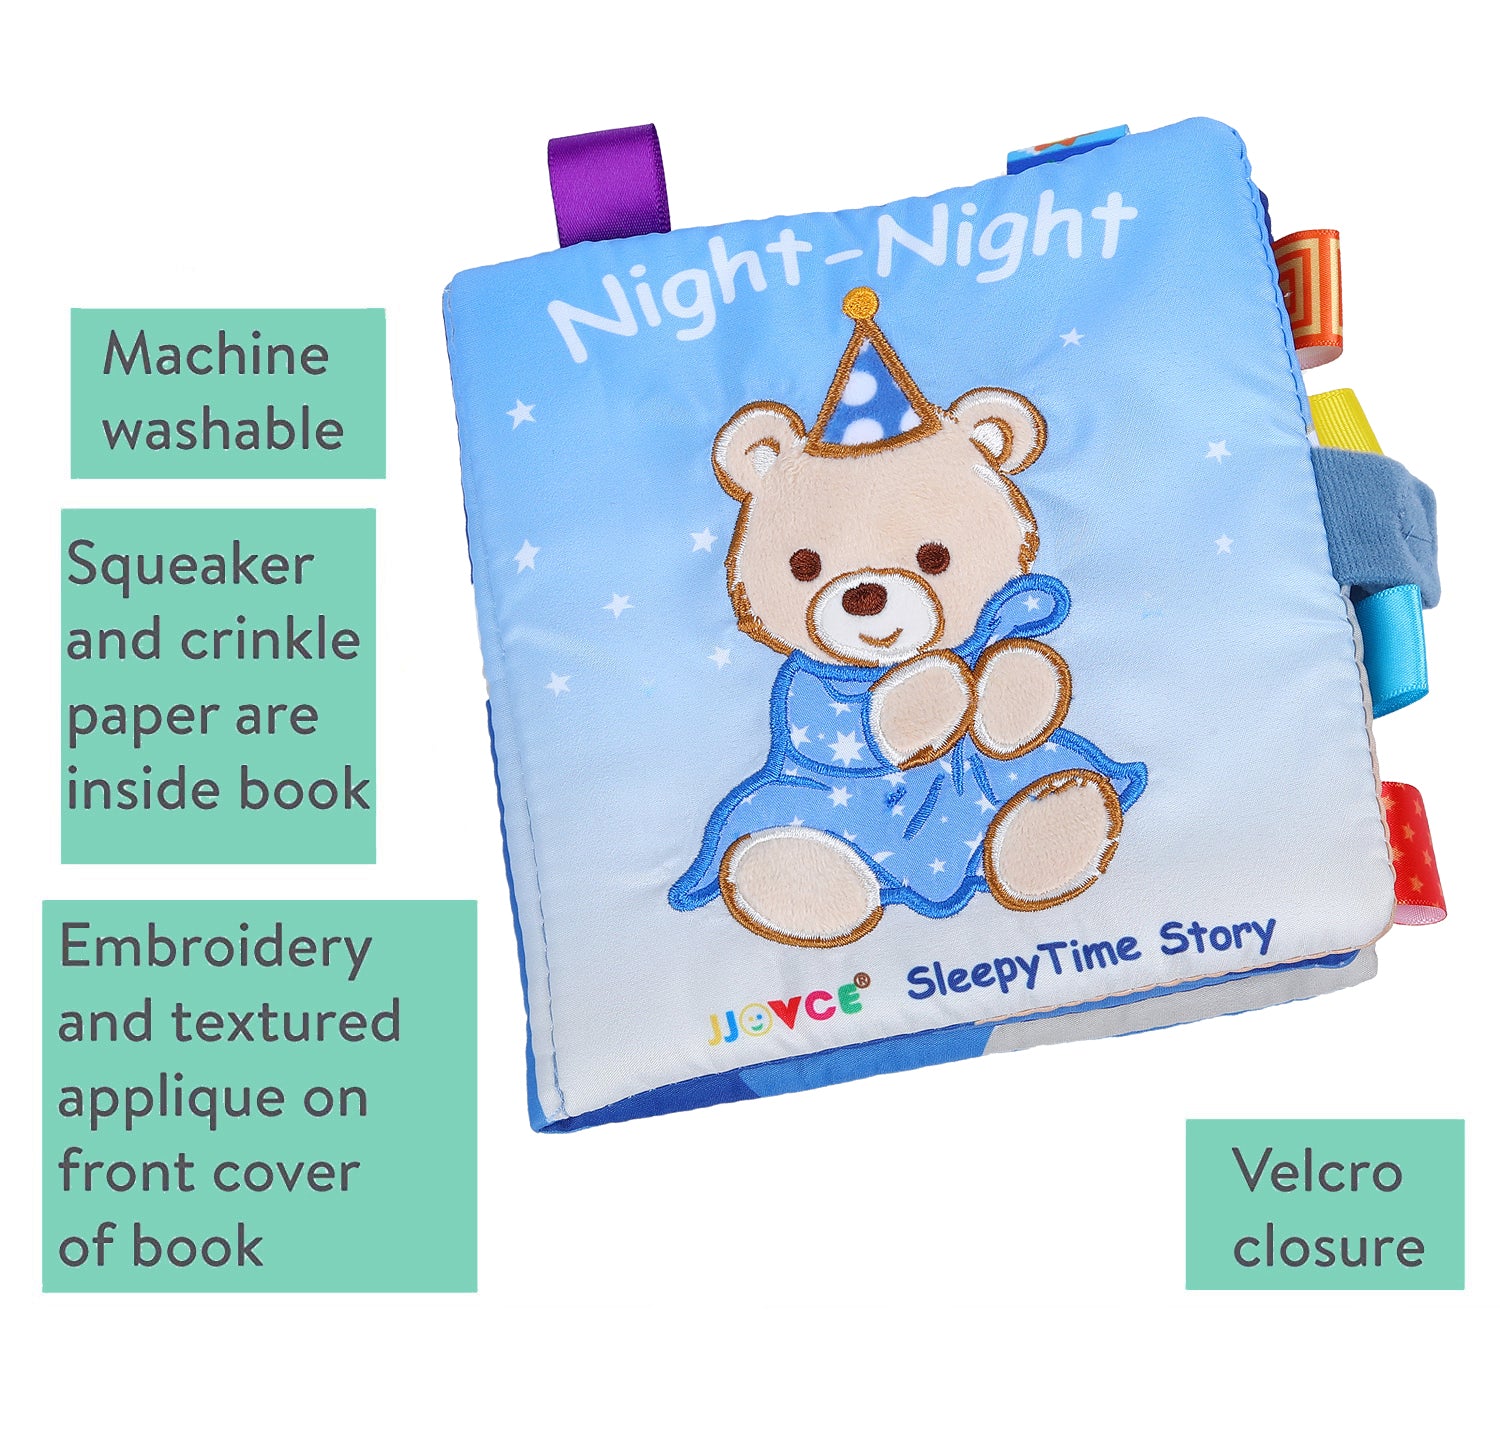 Sleepy Time Educational Learning 3D Cloth Book With Rustle Paper - Multicolour - Baby Moo